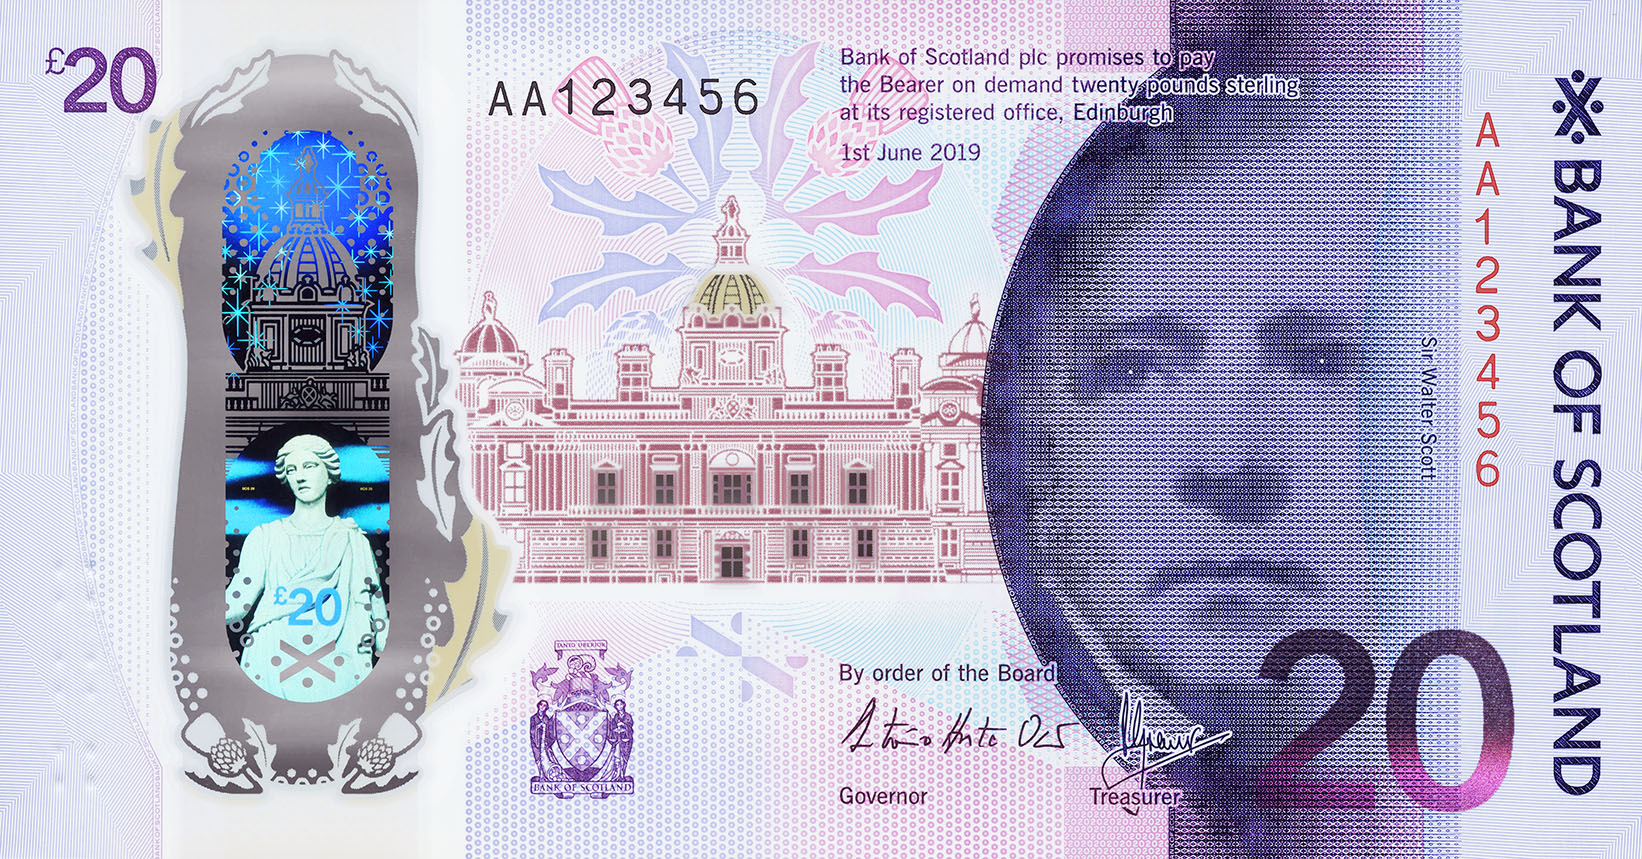 Bank of Scotland's latest £20 note features Queensferry Crossing